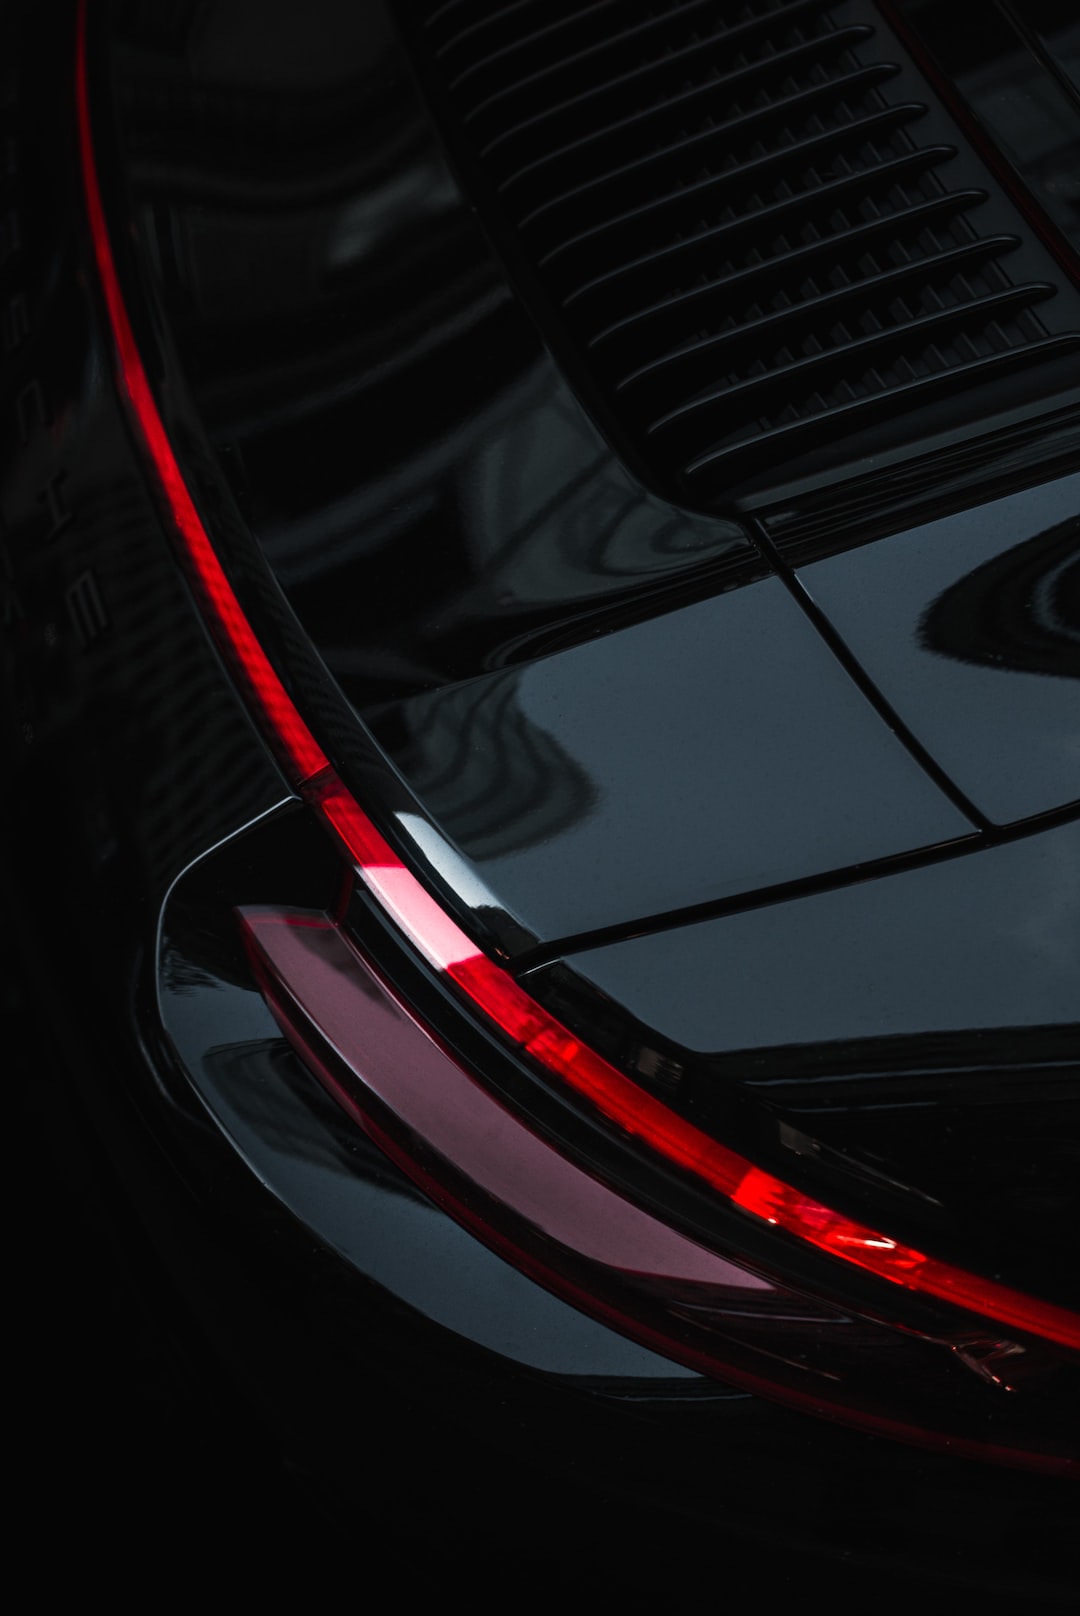 a close up of the tail lights of a car